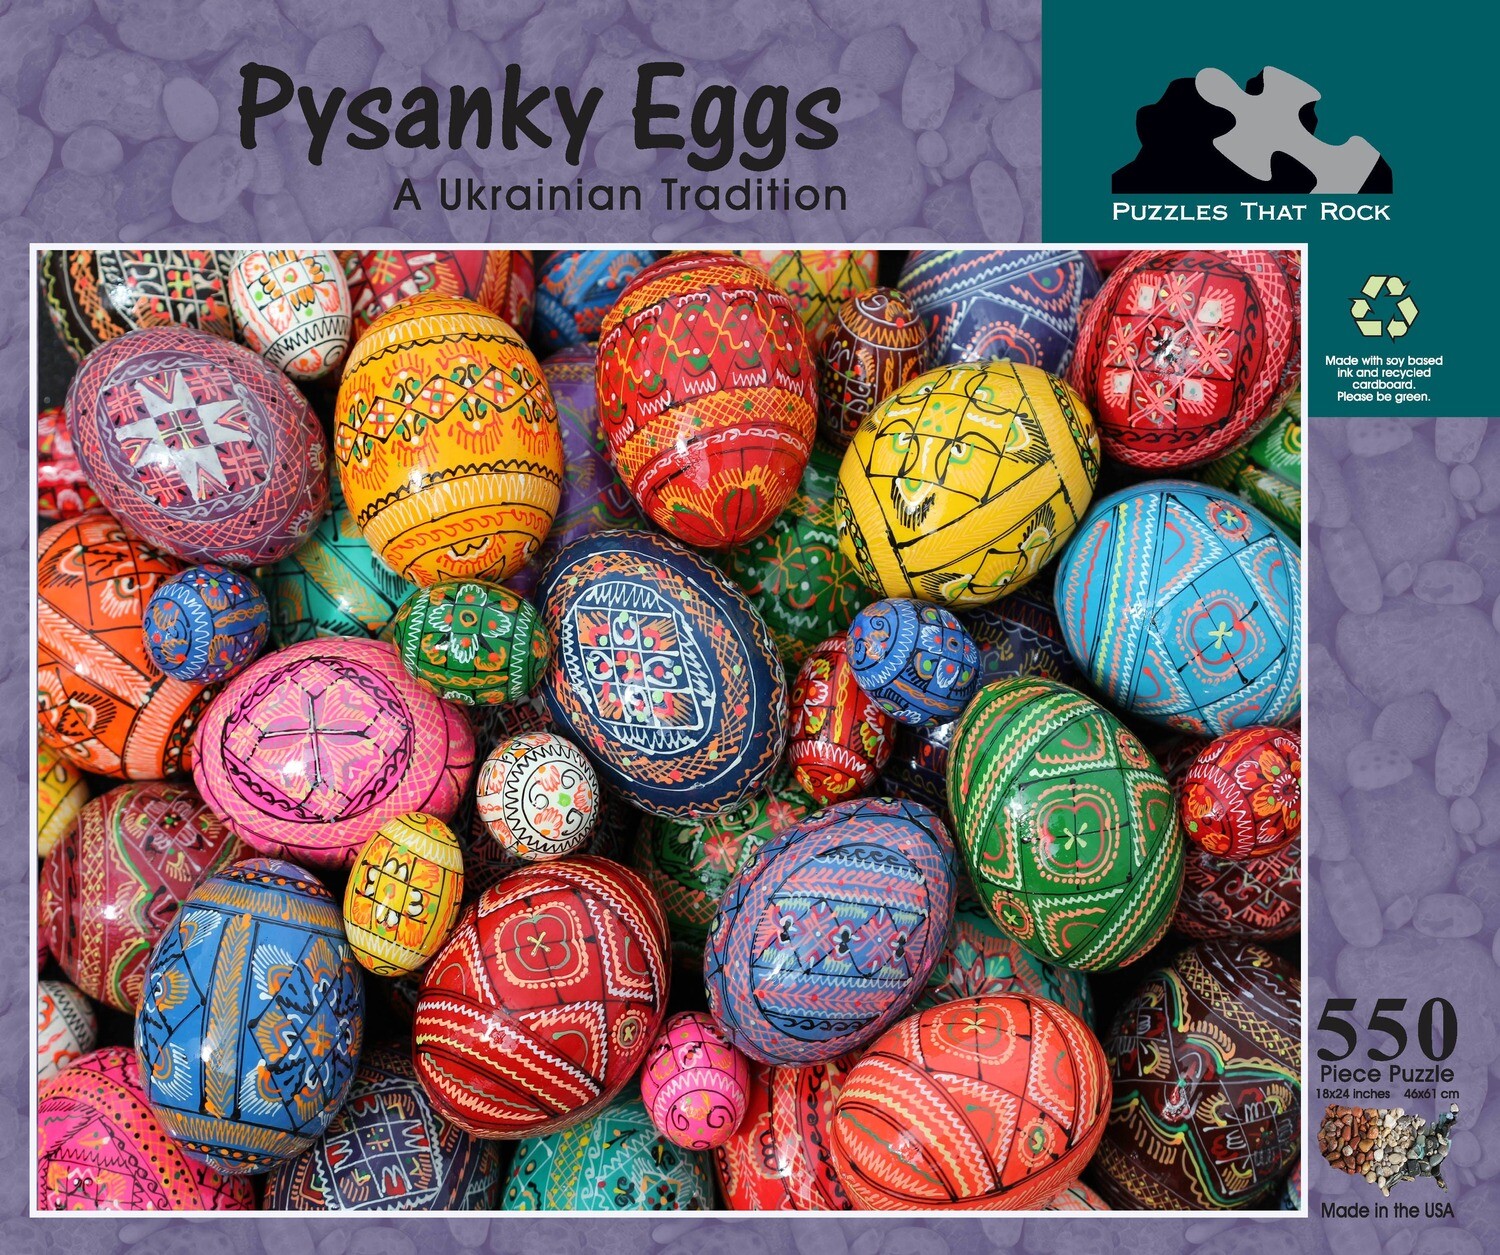 Pysanky Eggs Jigsaw Puzzle 550 Pieces